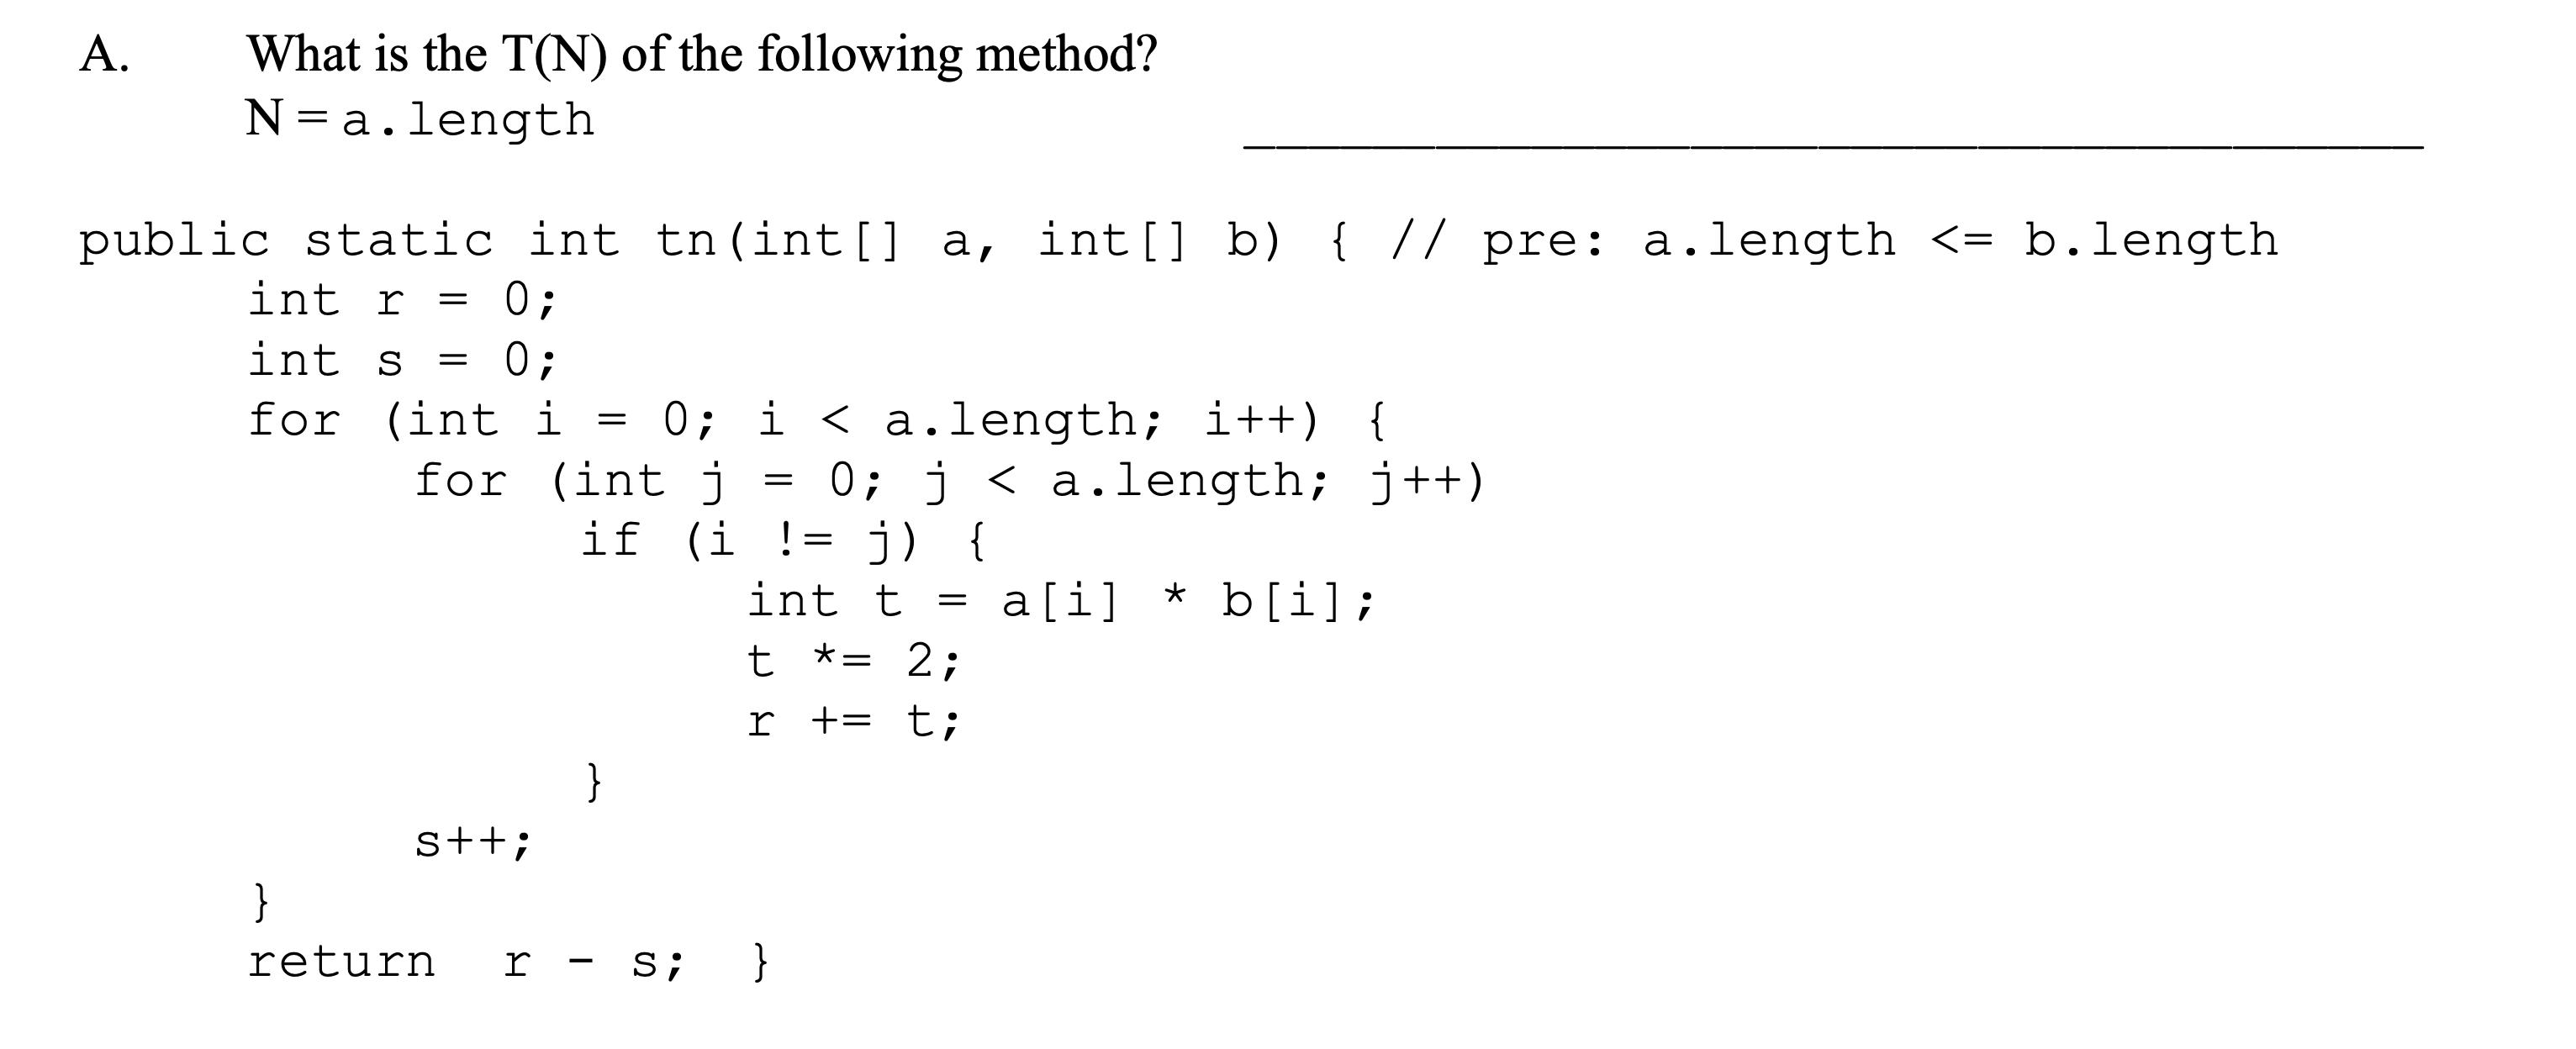 A. What is the T(N) of the following method? N = a.length public static int tn (int[] a, int[] b) { // pre: